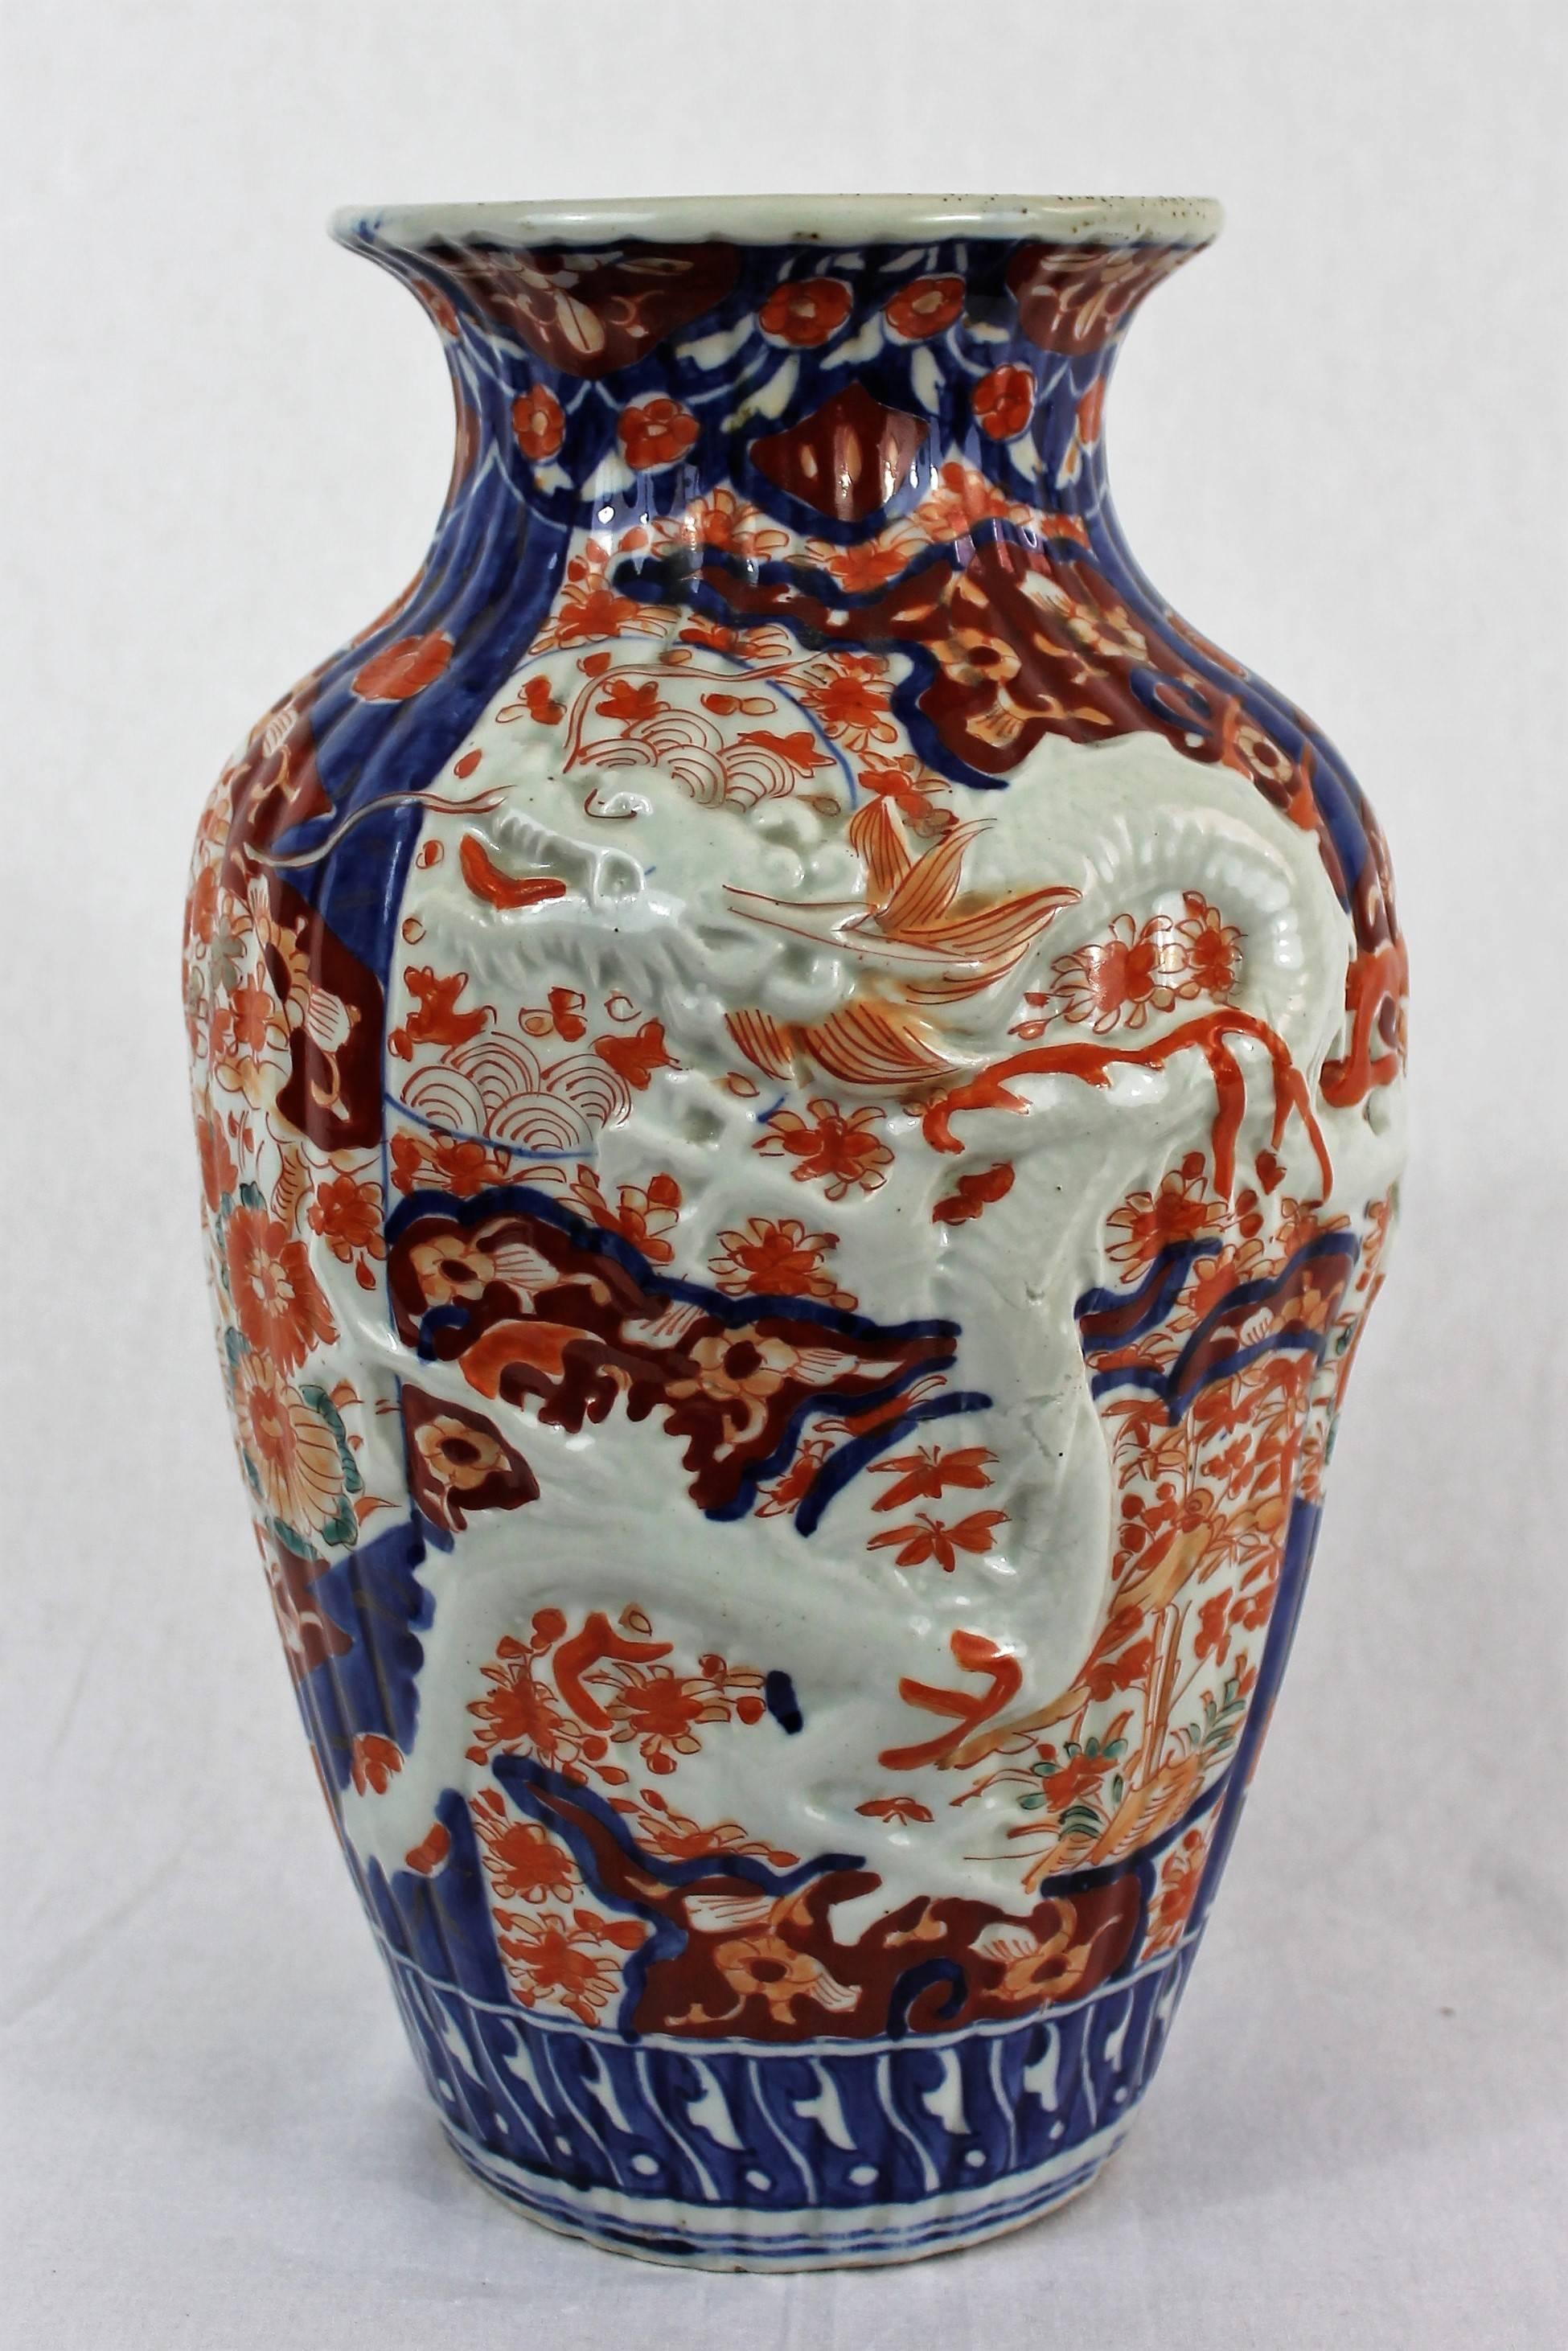 Very beautiful baluster-shaped ribbed vase in Japanese porcelain decorated with birds and flowers, in cobalt blue, iron red and white colors. Two sides of the vase are decorated with a dragon in relief. Production of the Imari area of the 19th